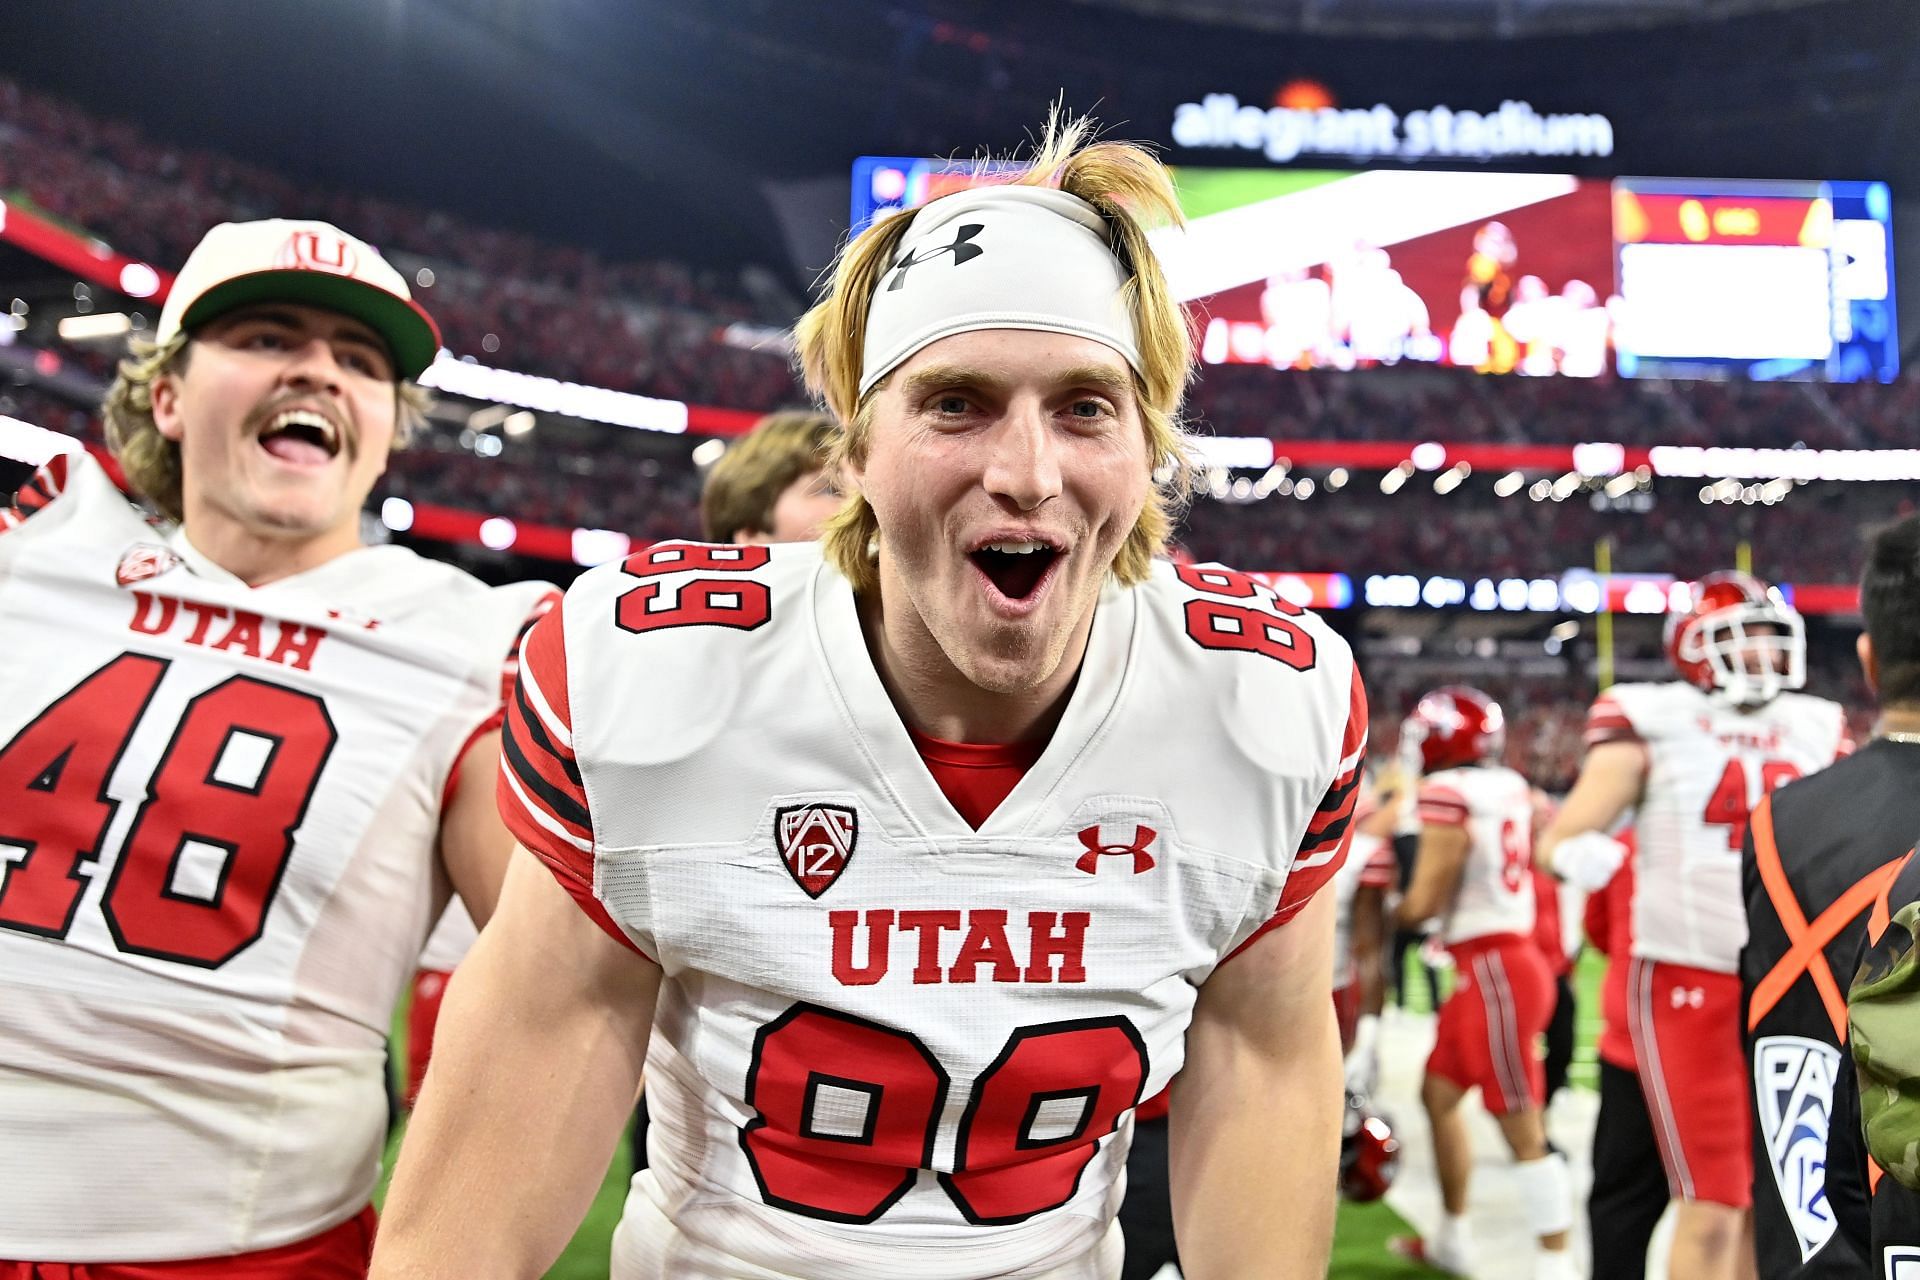 Utah is the reigning Pac-12 champions